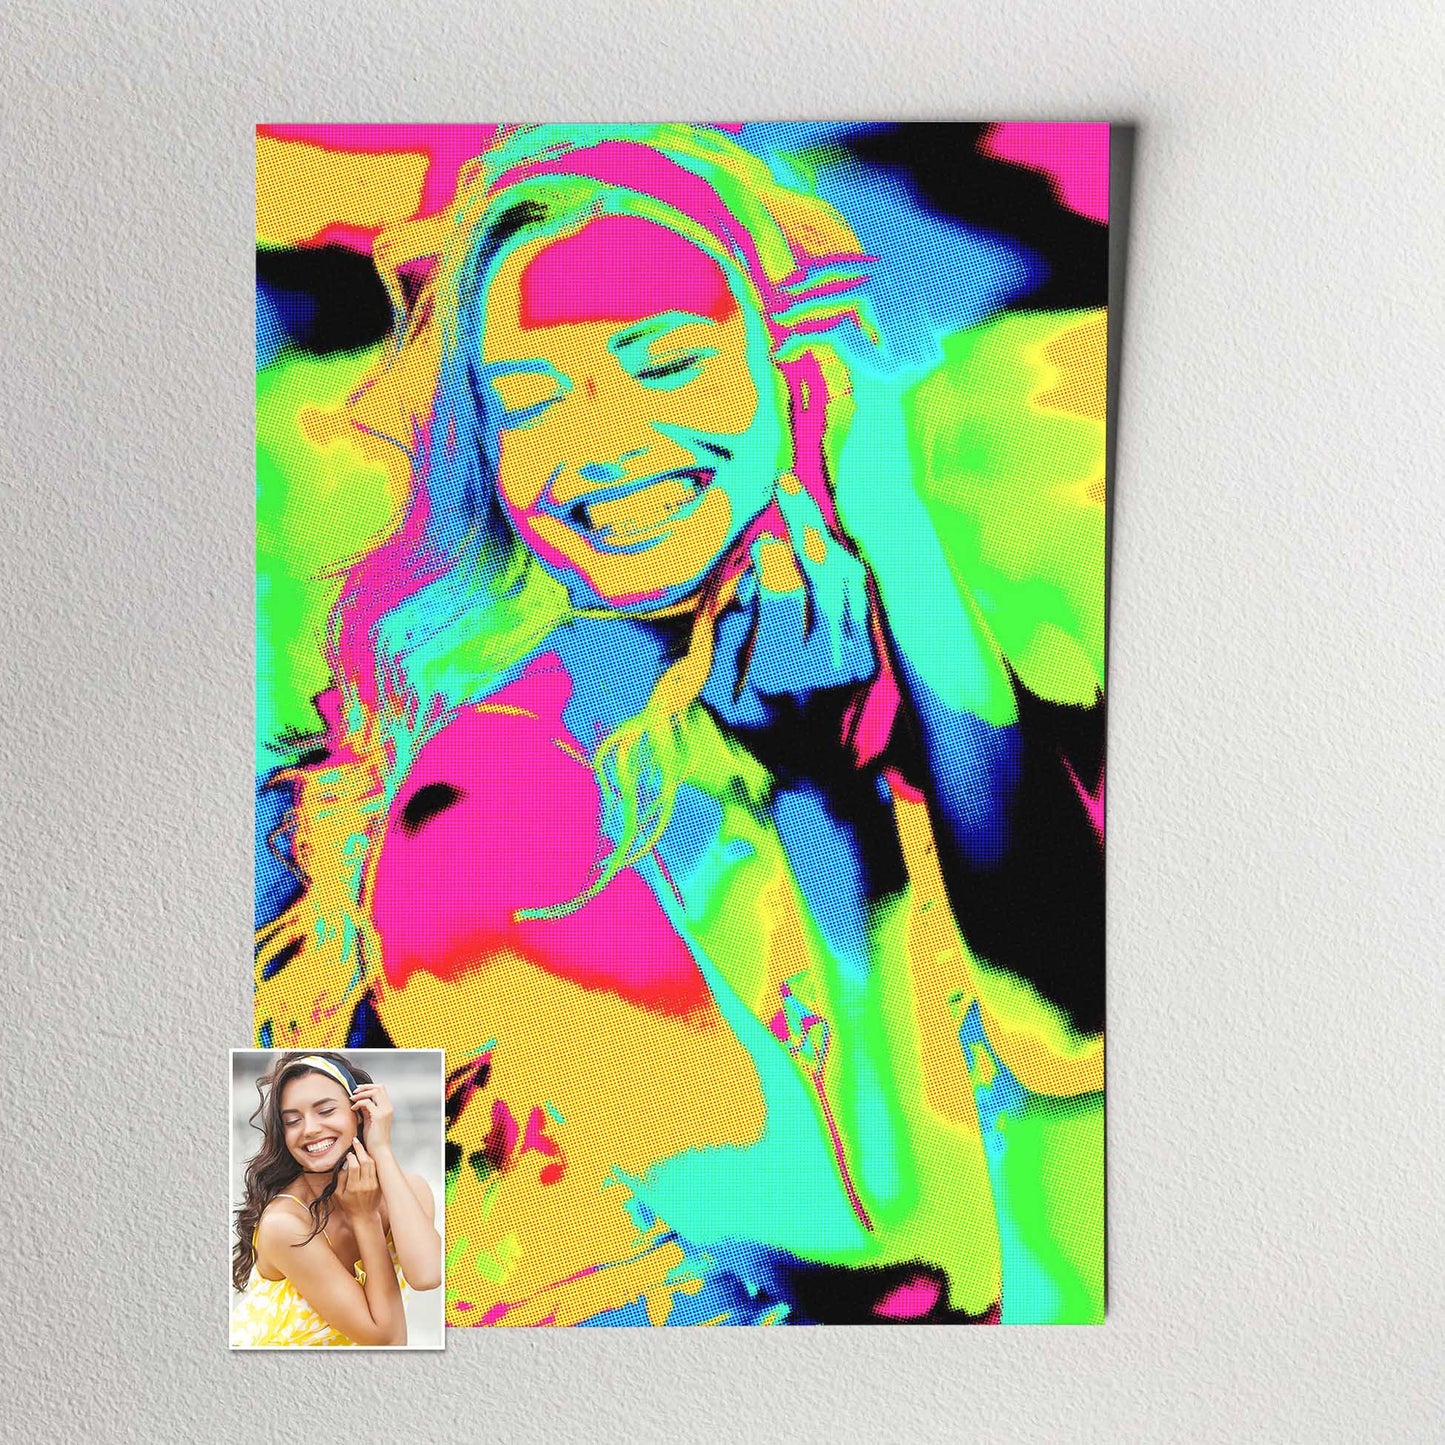 Say 'hello' to your Personalised Pop Art Print! This one-of-a-kind piece takes your photo and runs it through a sizzling, ultra cool pop art filter, transforming it into a retro-inspired masterpiece with bold, vibrant colors and a funky halftone